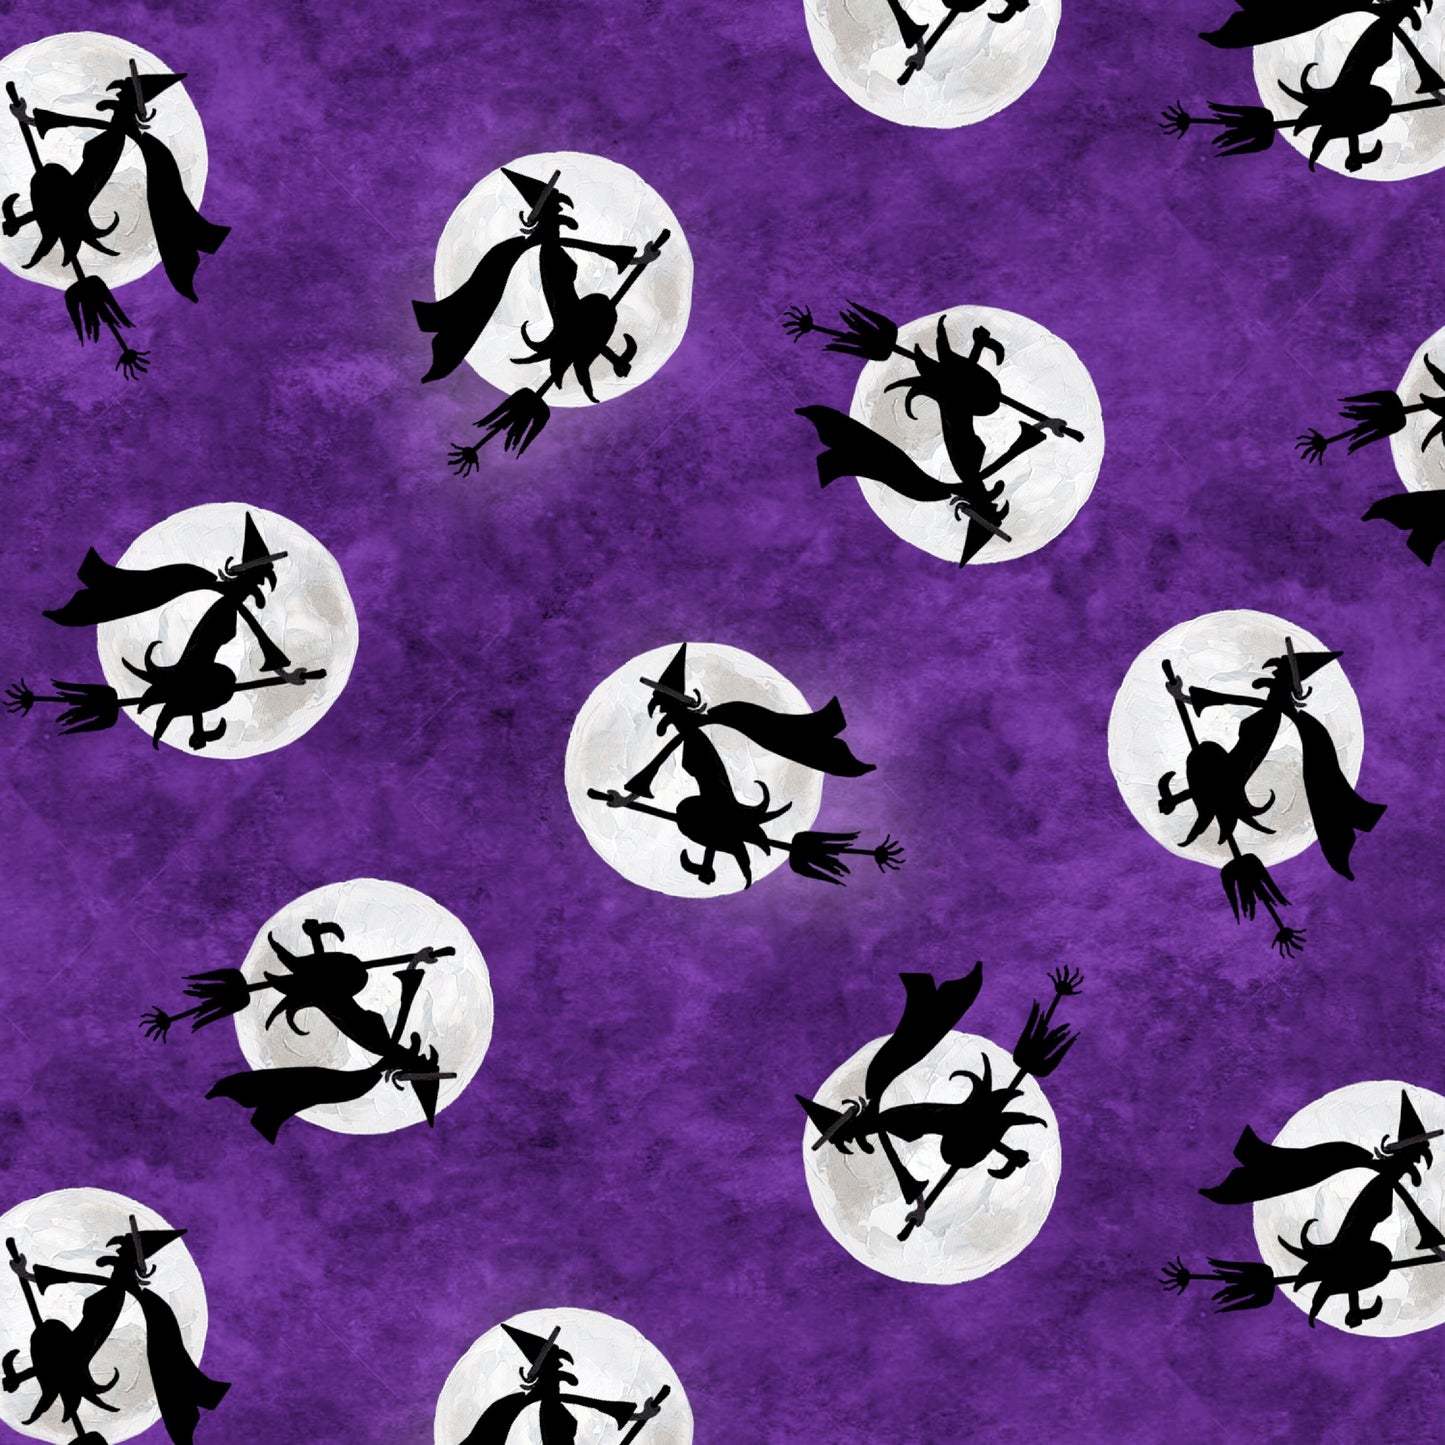 Booville by Annie Troe Flying Witches Purple 1035G-55 Glow in the Dark Cotton Woven Fabric